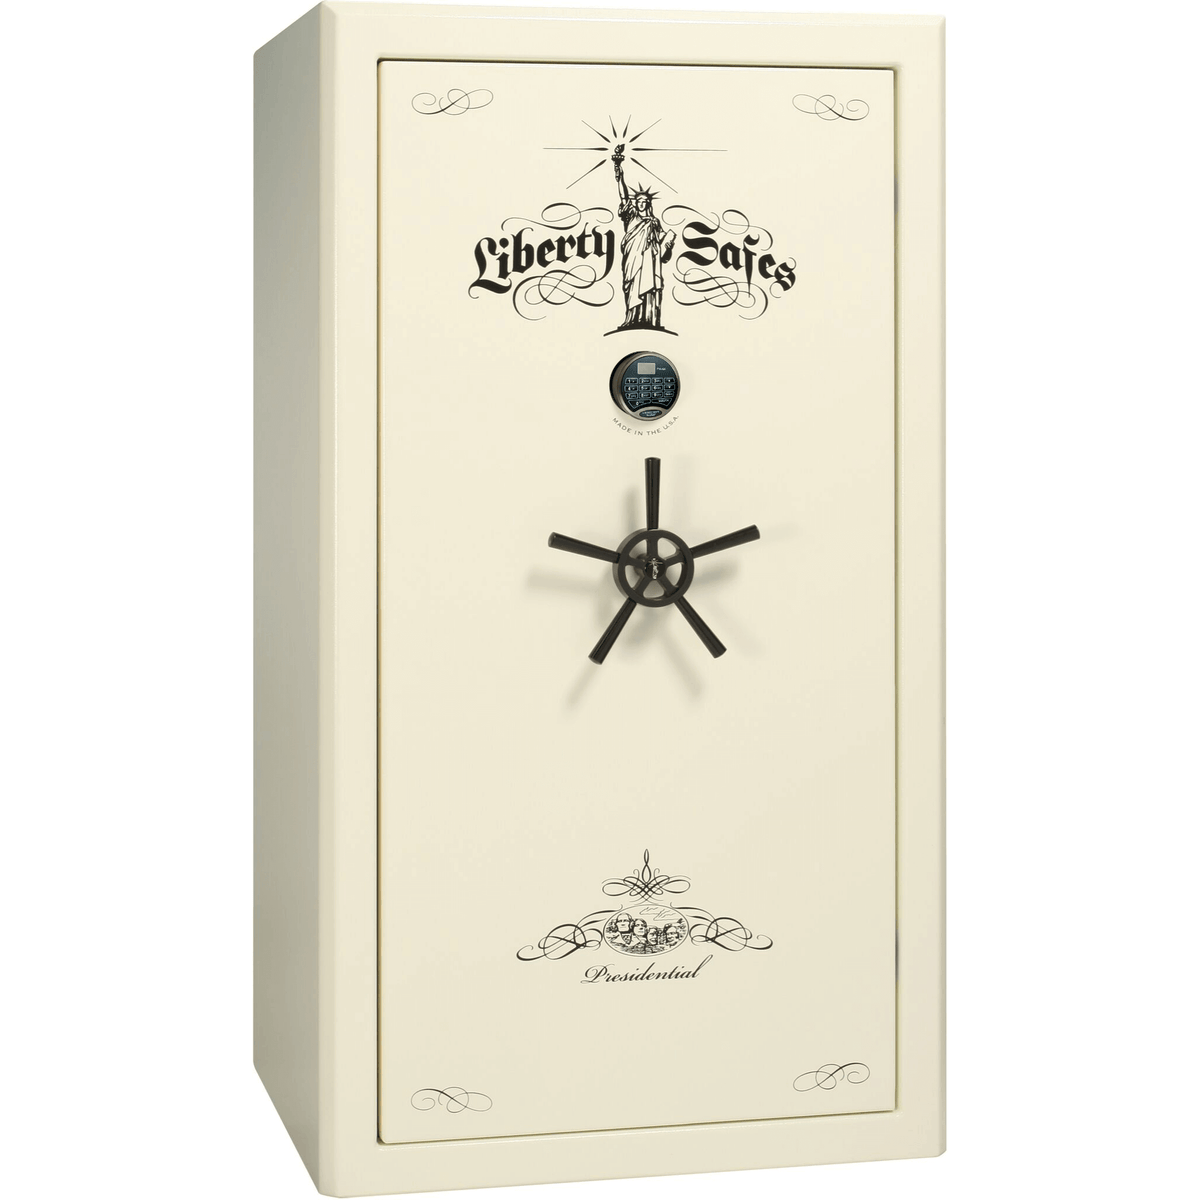 Liberty Safe Presidential 40 in White Marble with Black Chrome Electronic Lock, closed door.